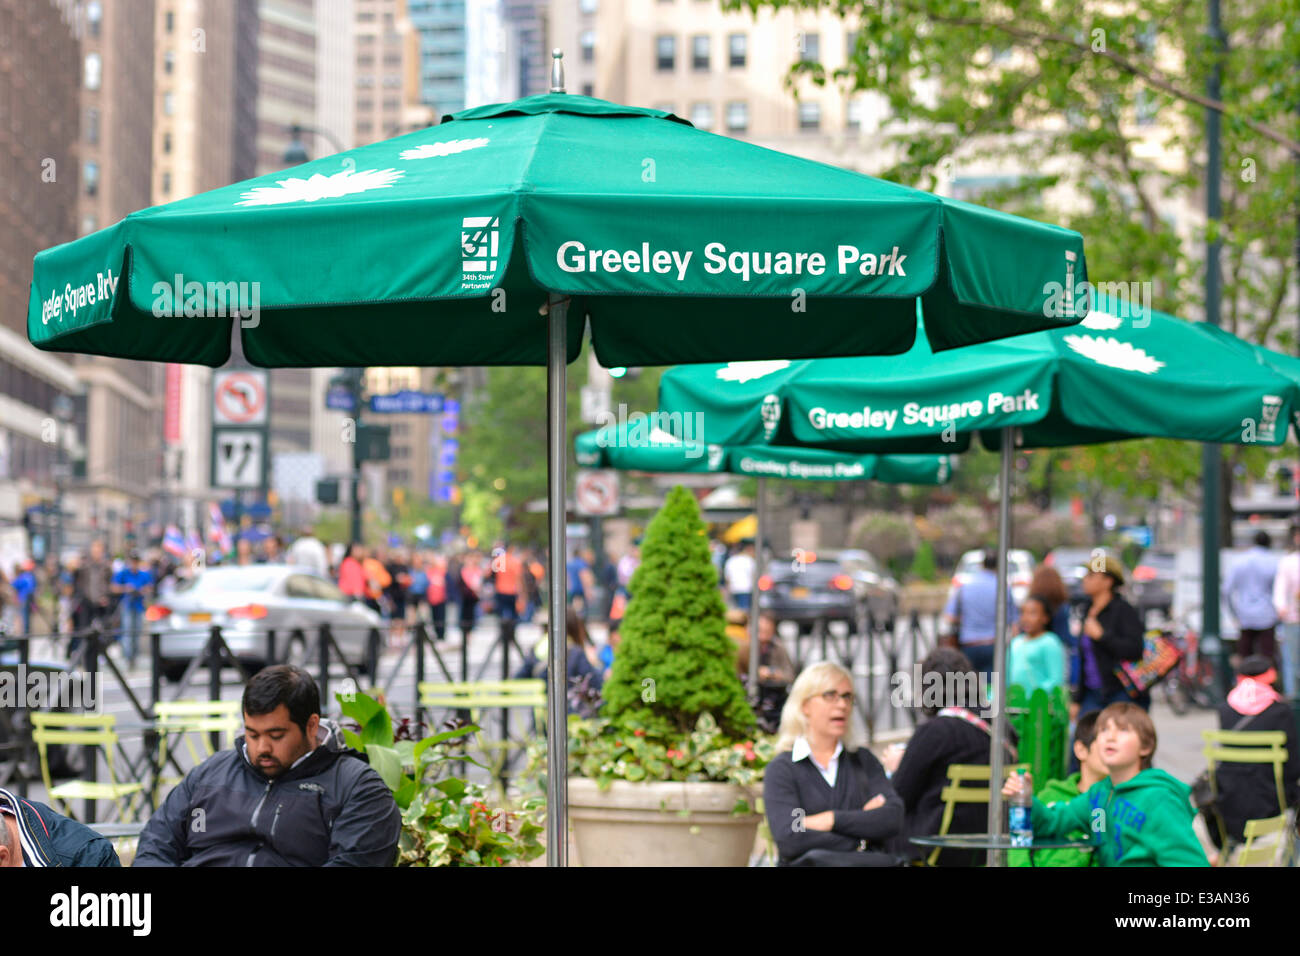 Greeley Square Park, Midtown West New York, NY Foto Stock